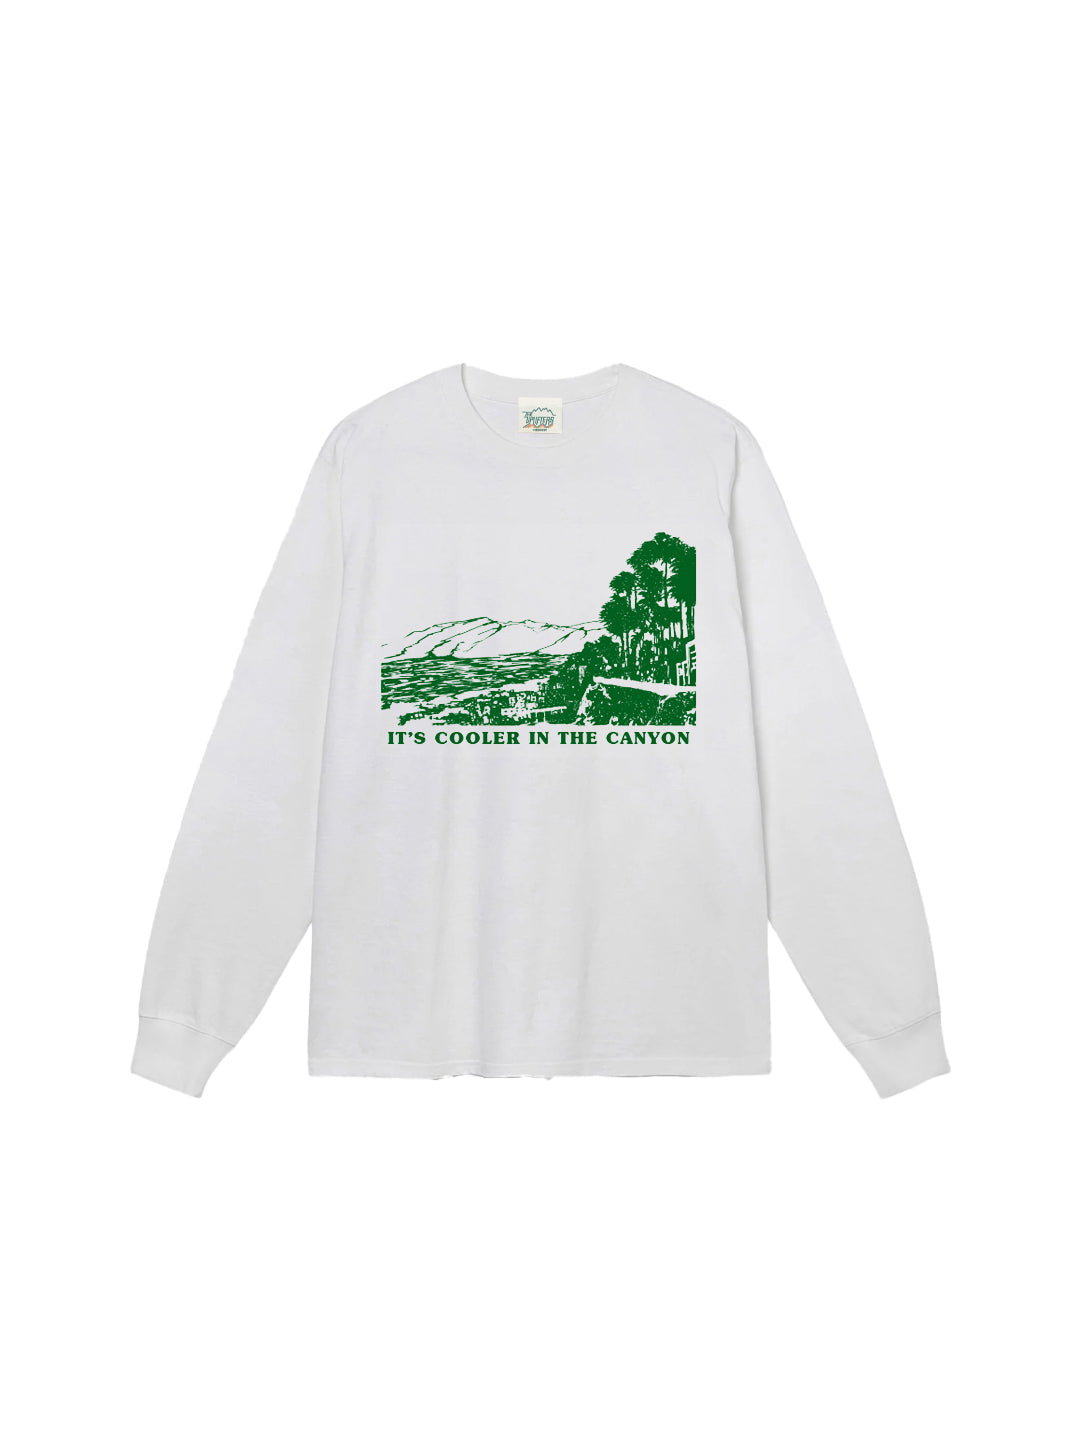 Cooler in the Canyon Long Sleeve Tee